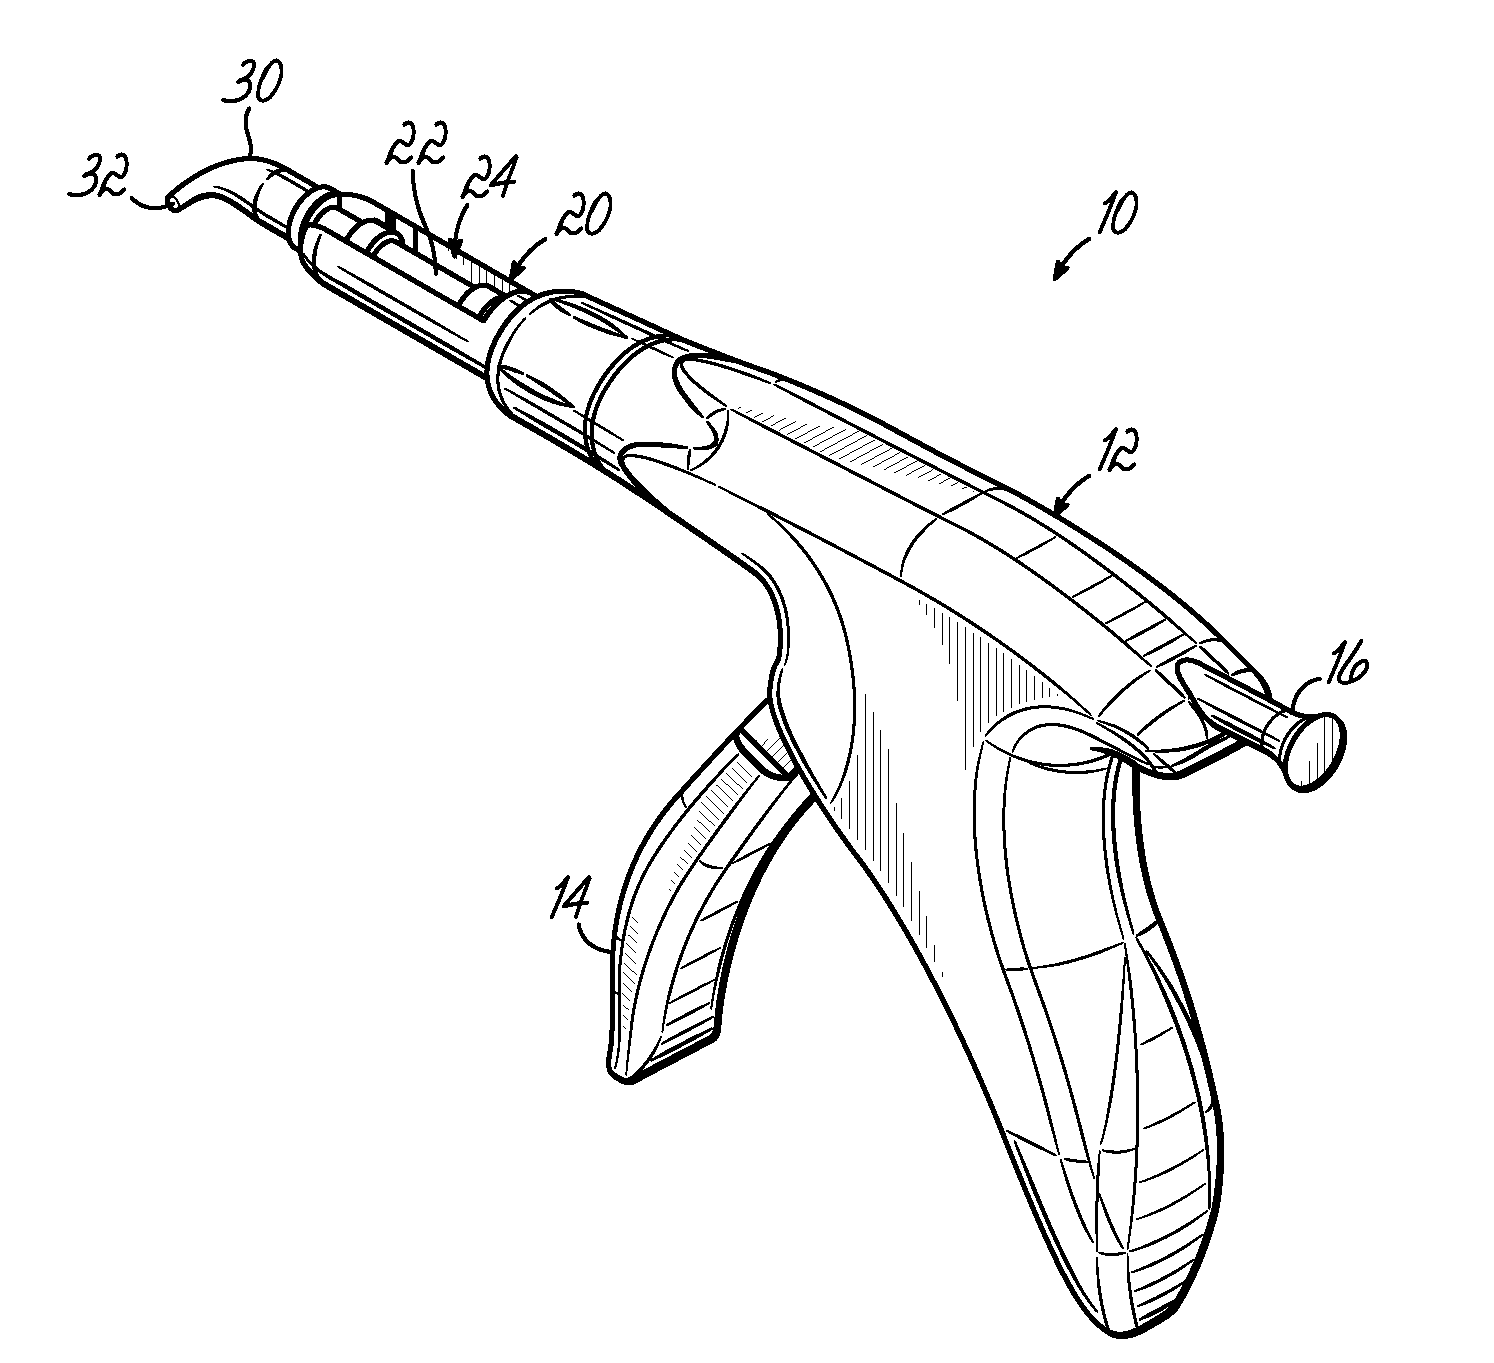 Dental paste dispensing device and method of use